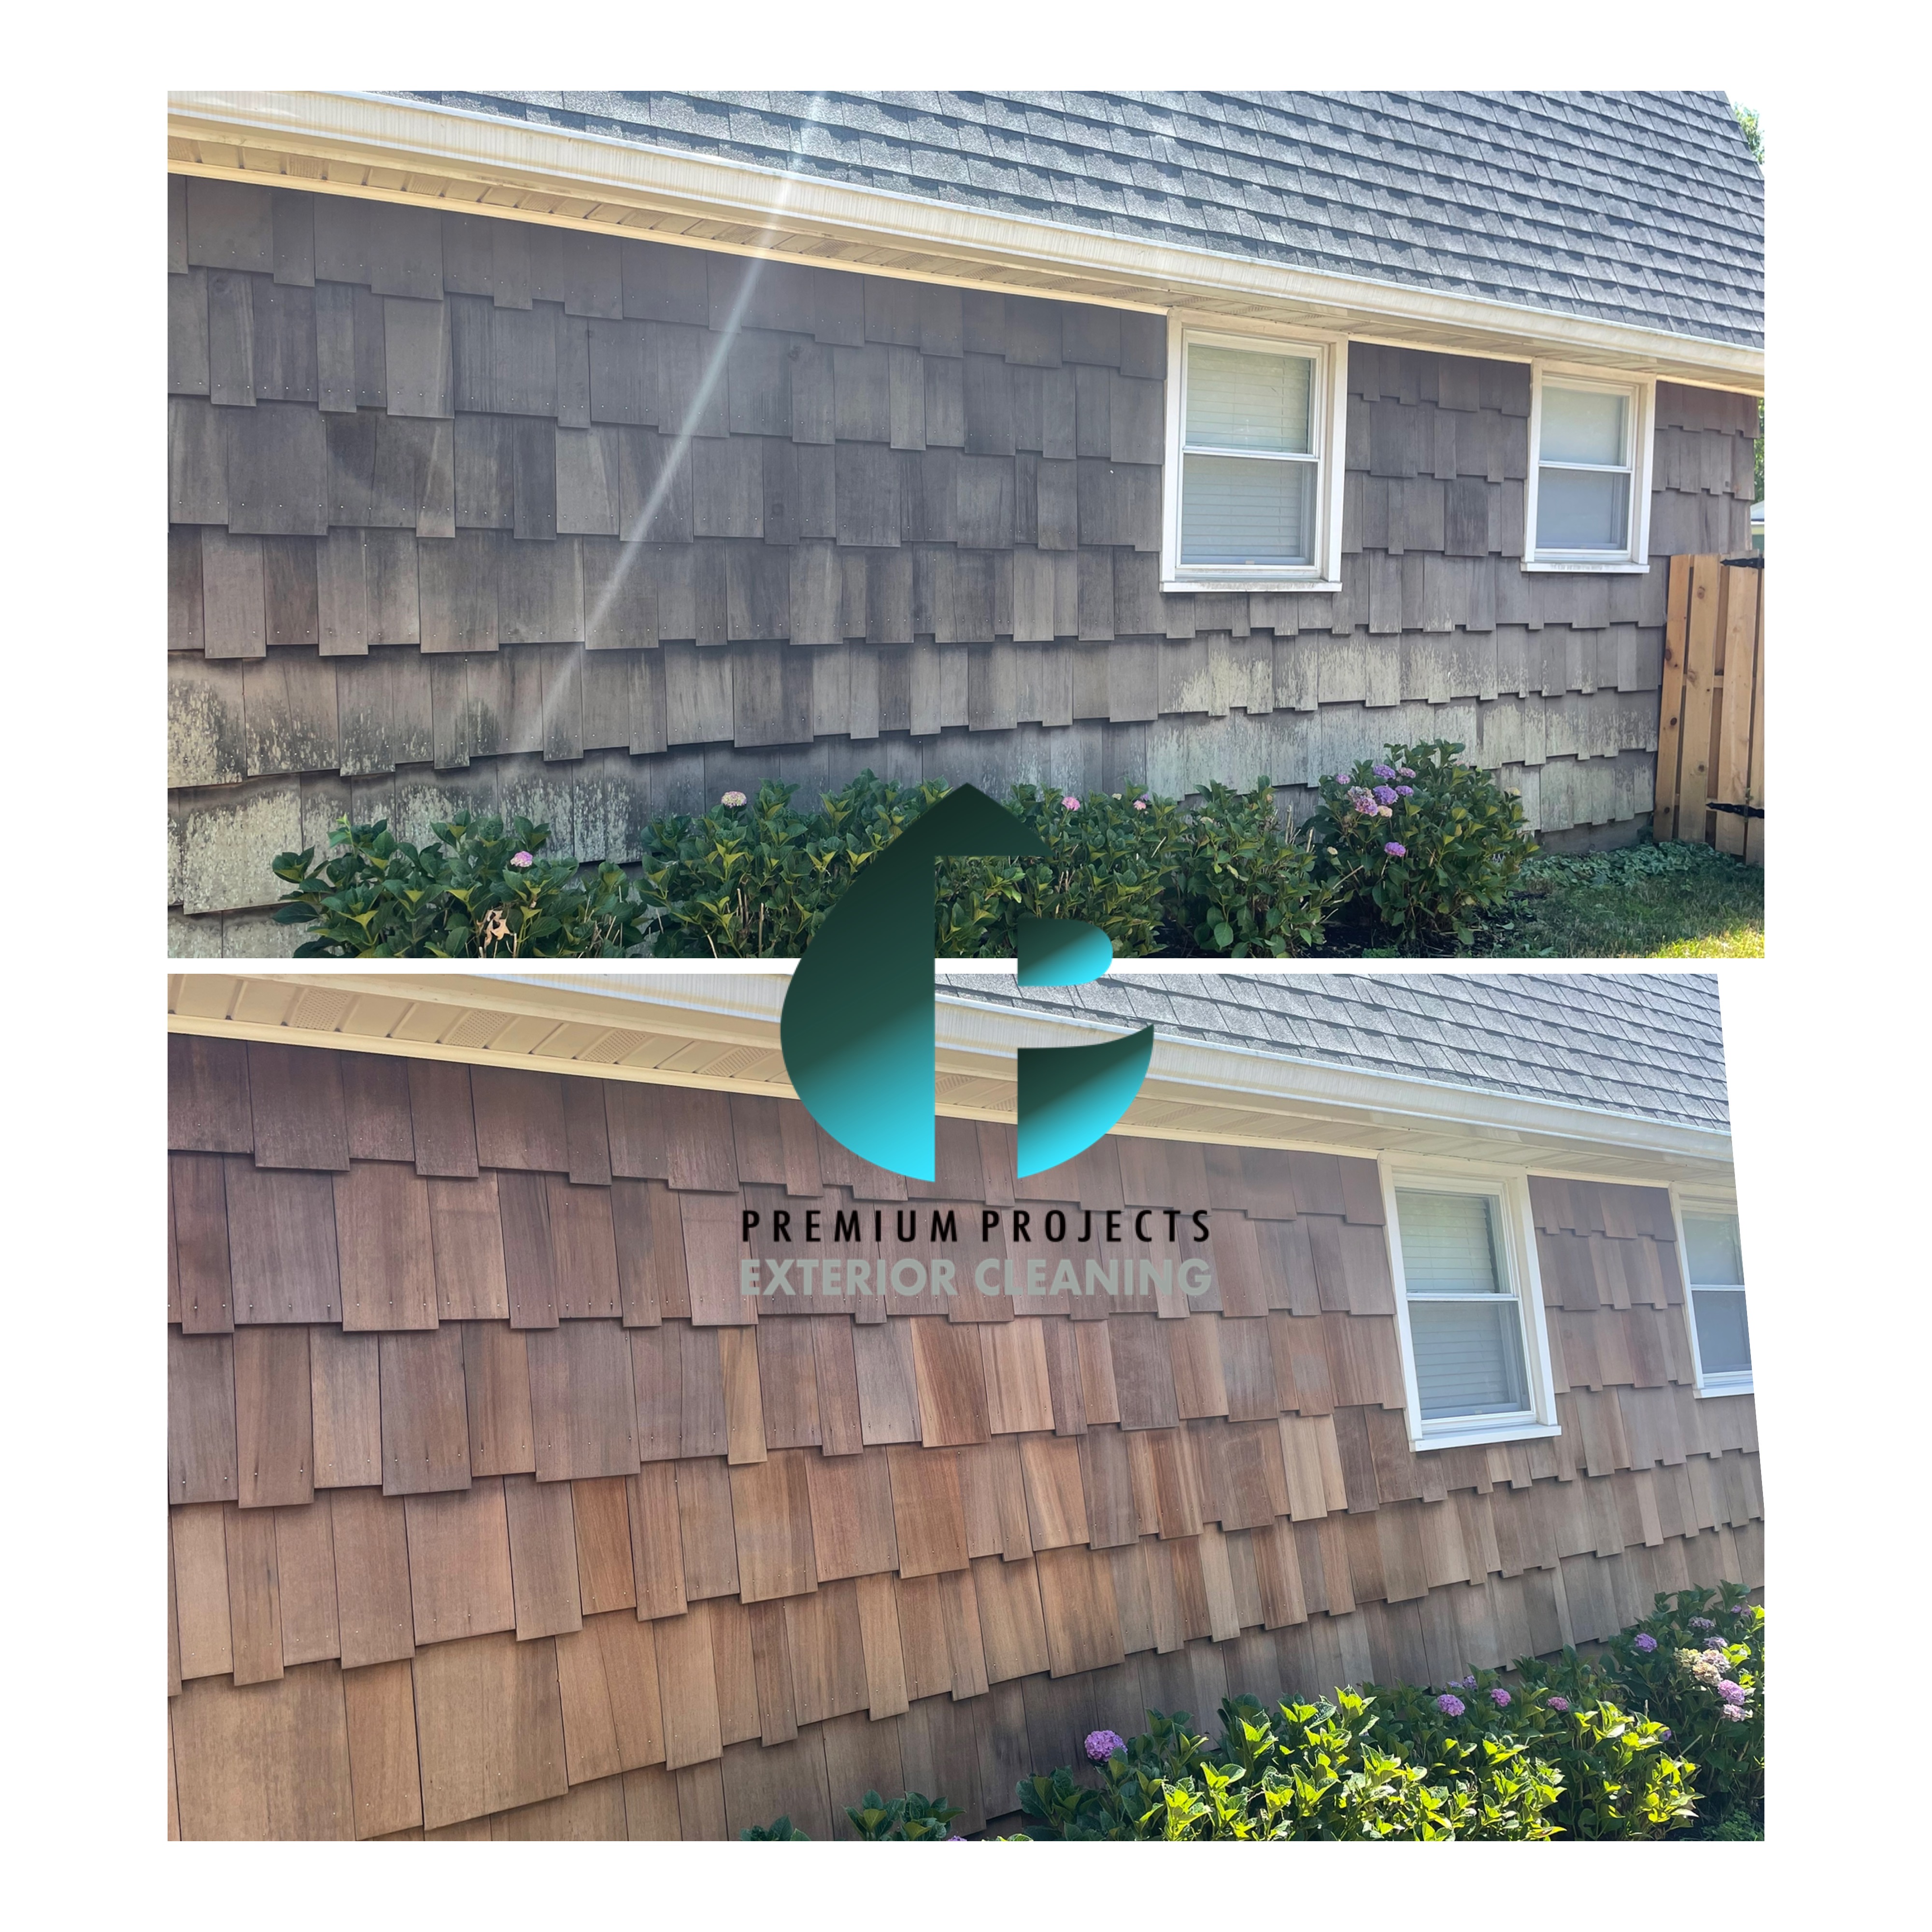 Premium Projects Exterior Cleaning Offers Diversified Pressure Washing Services In New Jersey